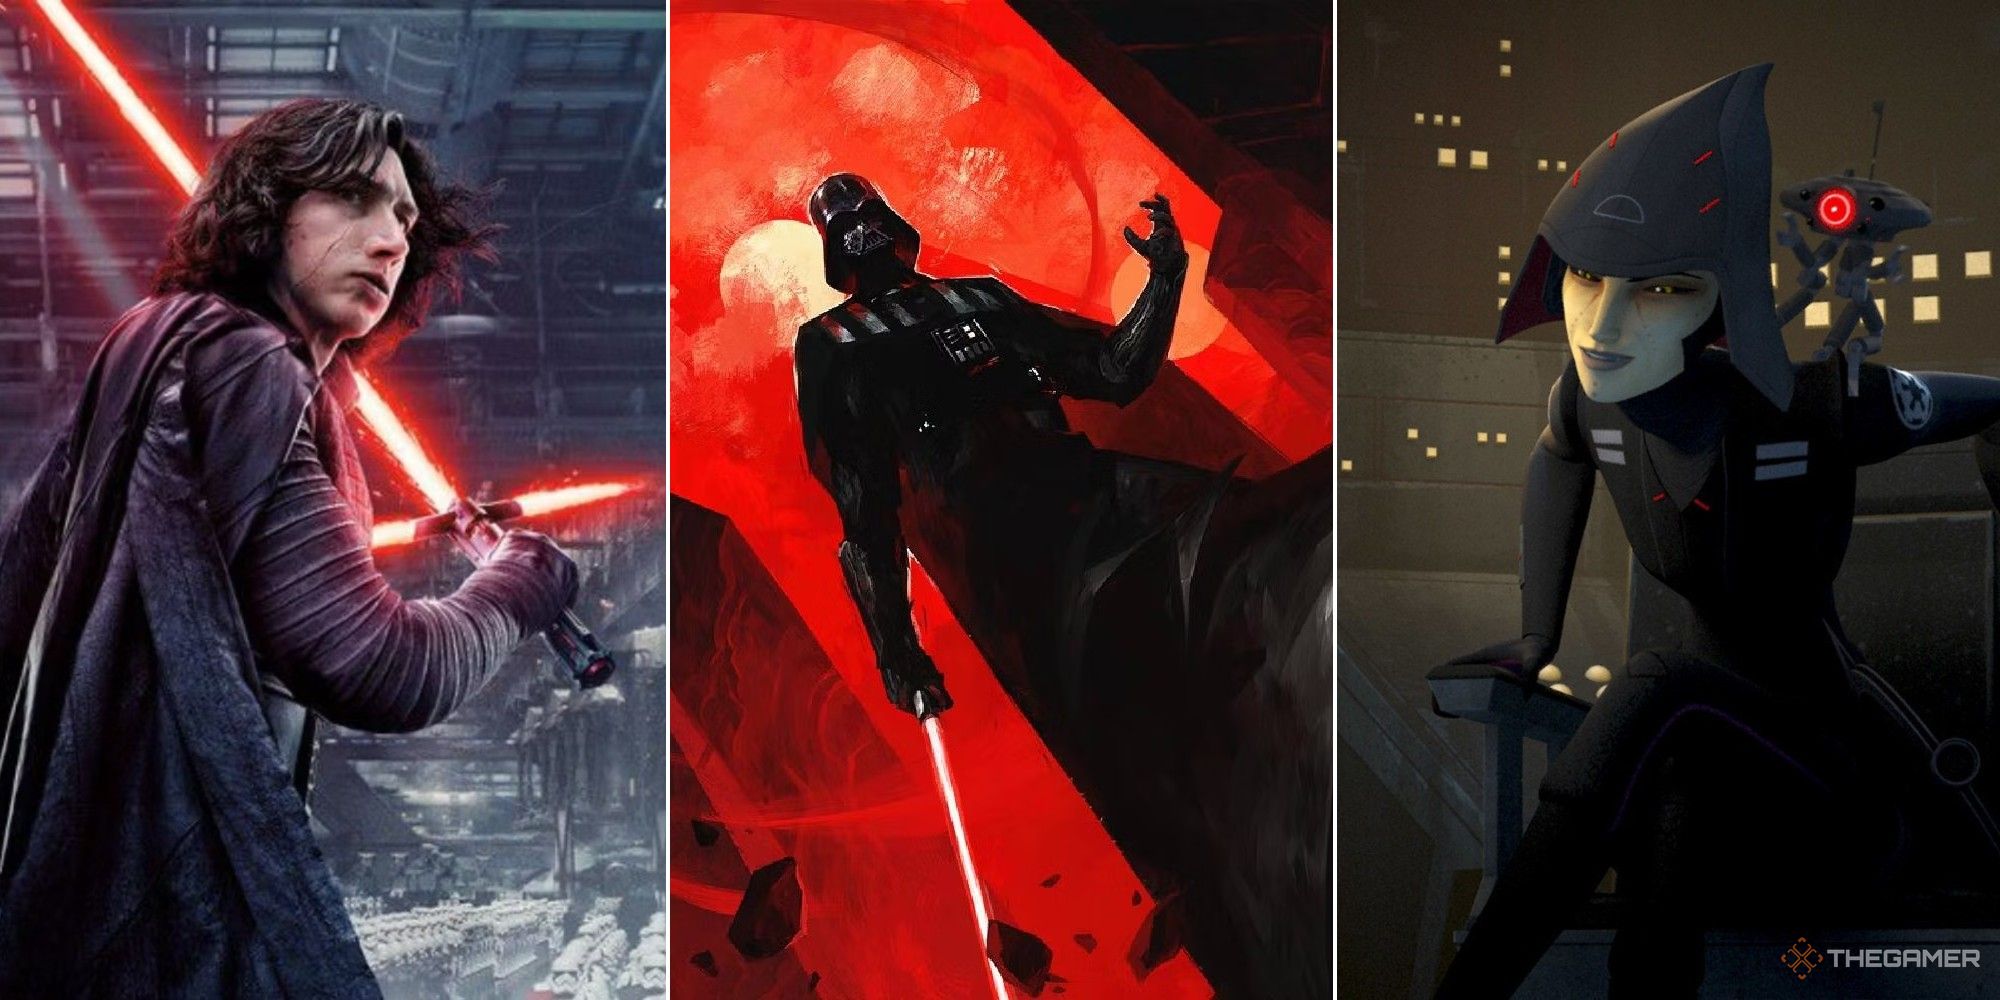 Collage showing Kylo Ren, Darth Vader and Seventh Sister from Star Wars